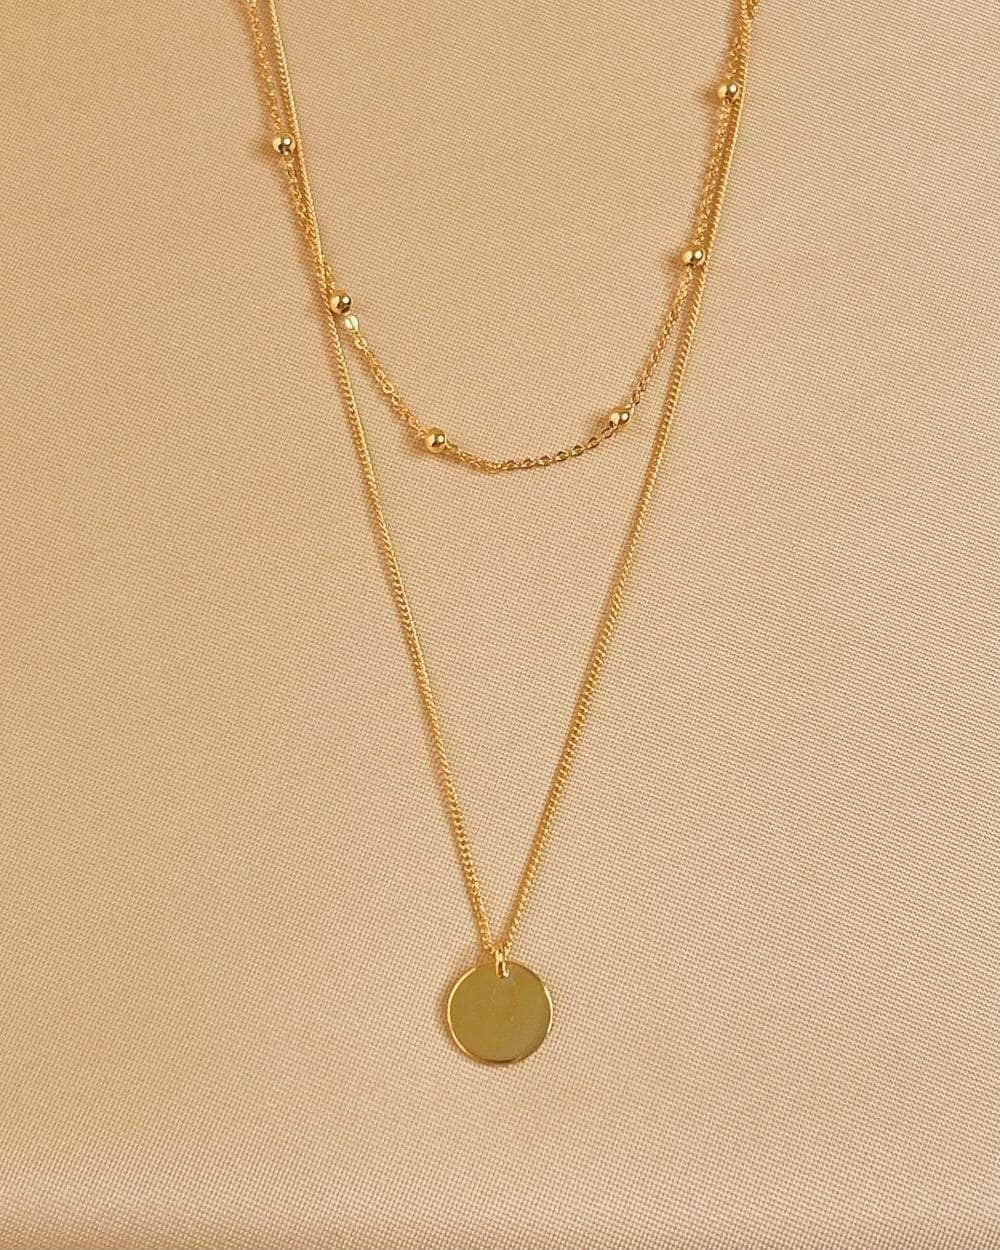 So Dainty Co. Necklaces Amy Gold Necklace Gold Plated 925 Sterling Silver Jewelry